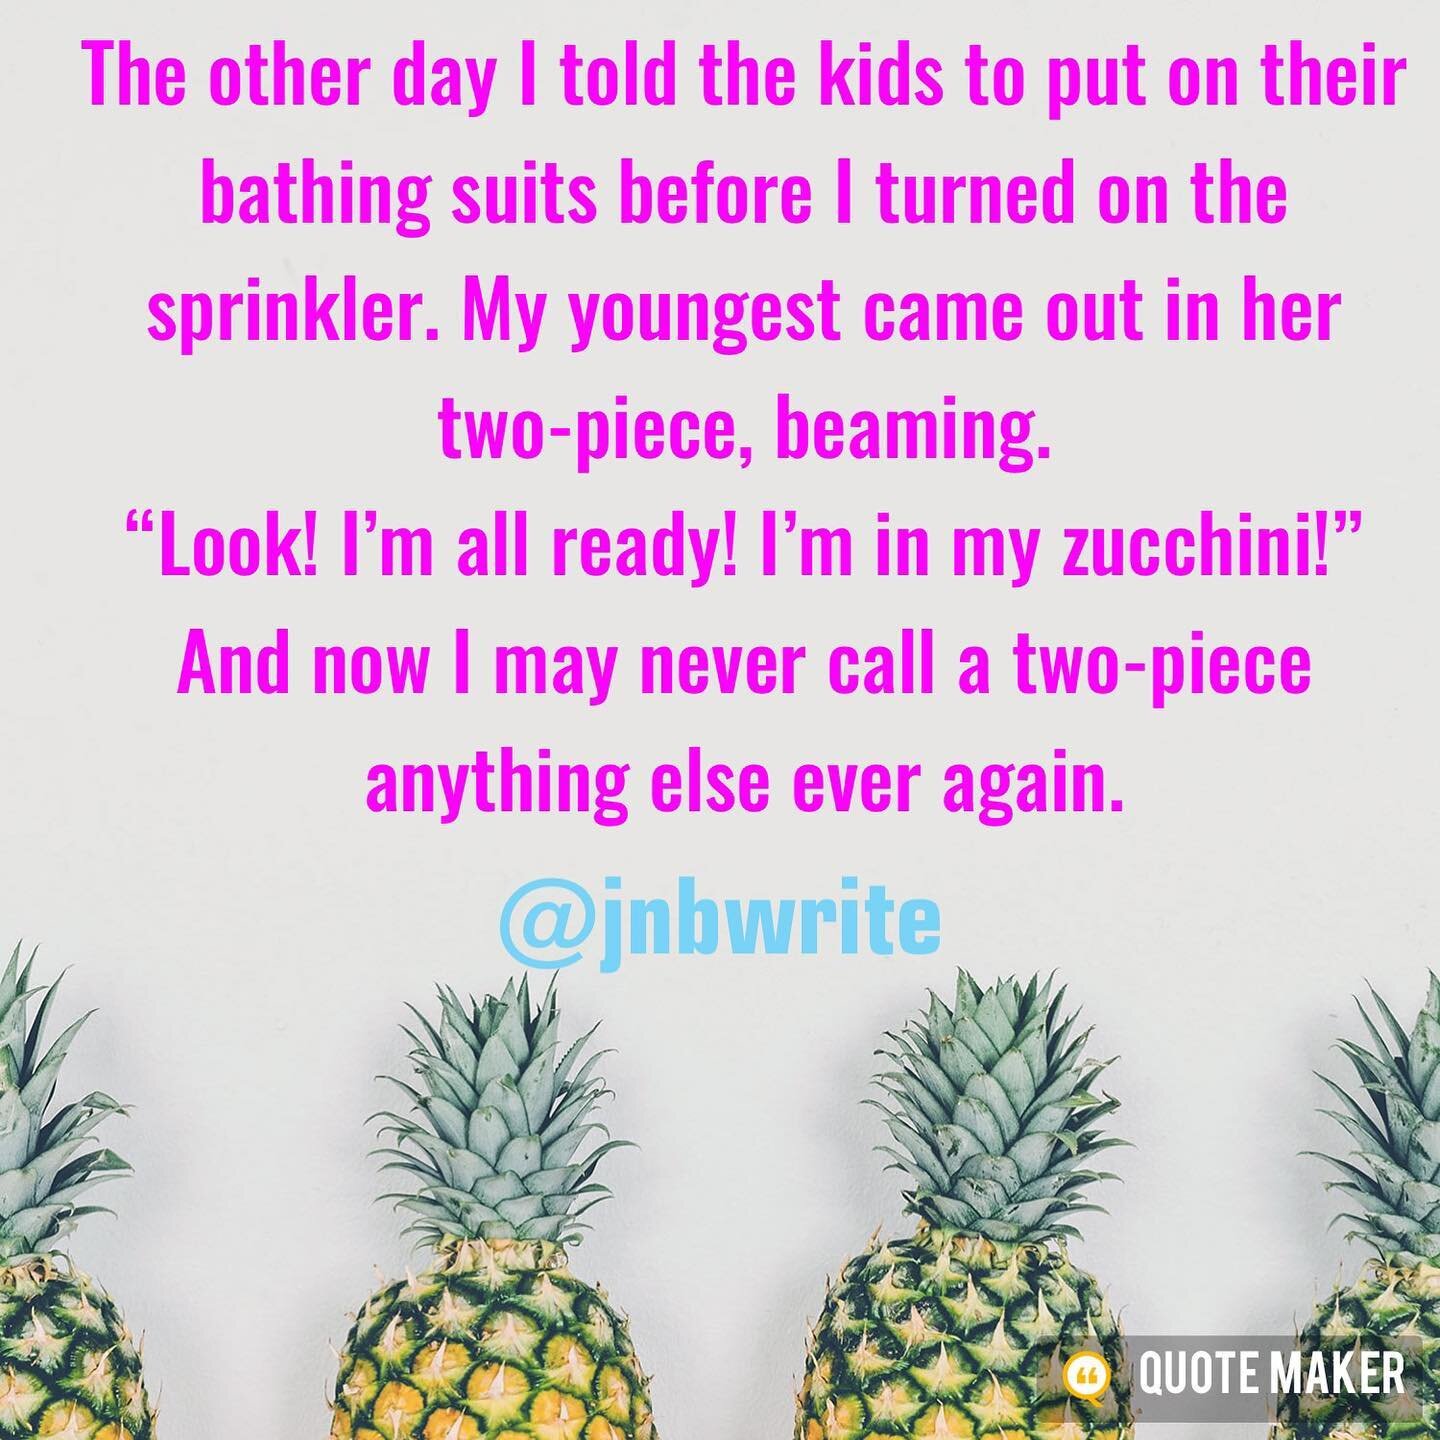 There are some mispronunciations that are too cute to fix ❤️

#motherhood #momlife #realmotherhood #realmom #realmomlife #mom #momminainteasy #mommin #childhoodunplugged #motherhoodunfiltered #motherhoodunplugged #writermom #writersofinstagram #amwri